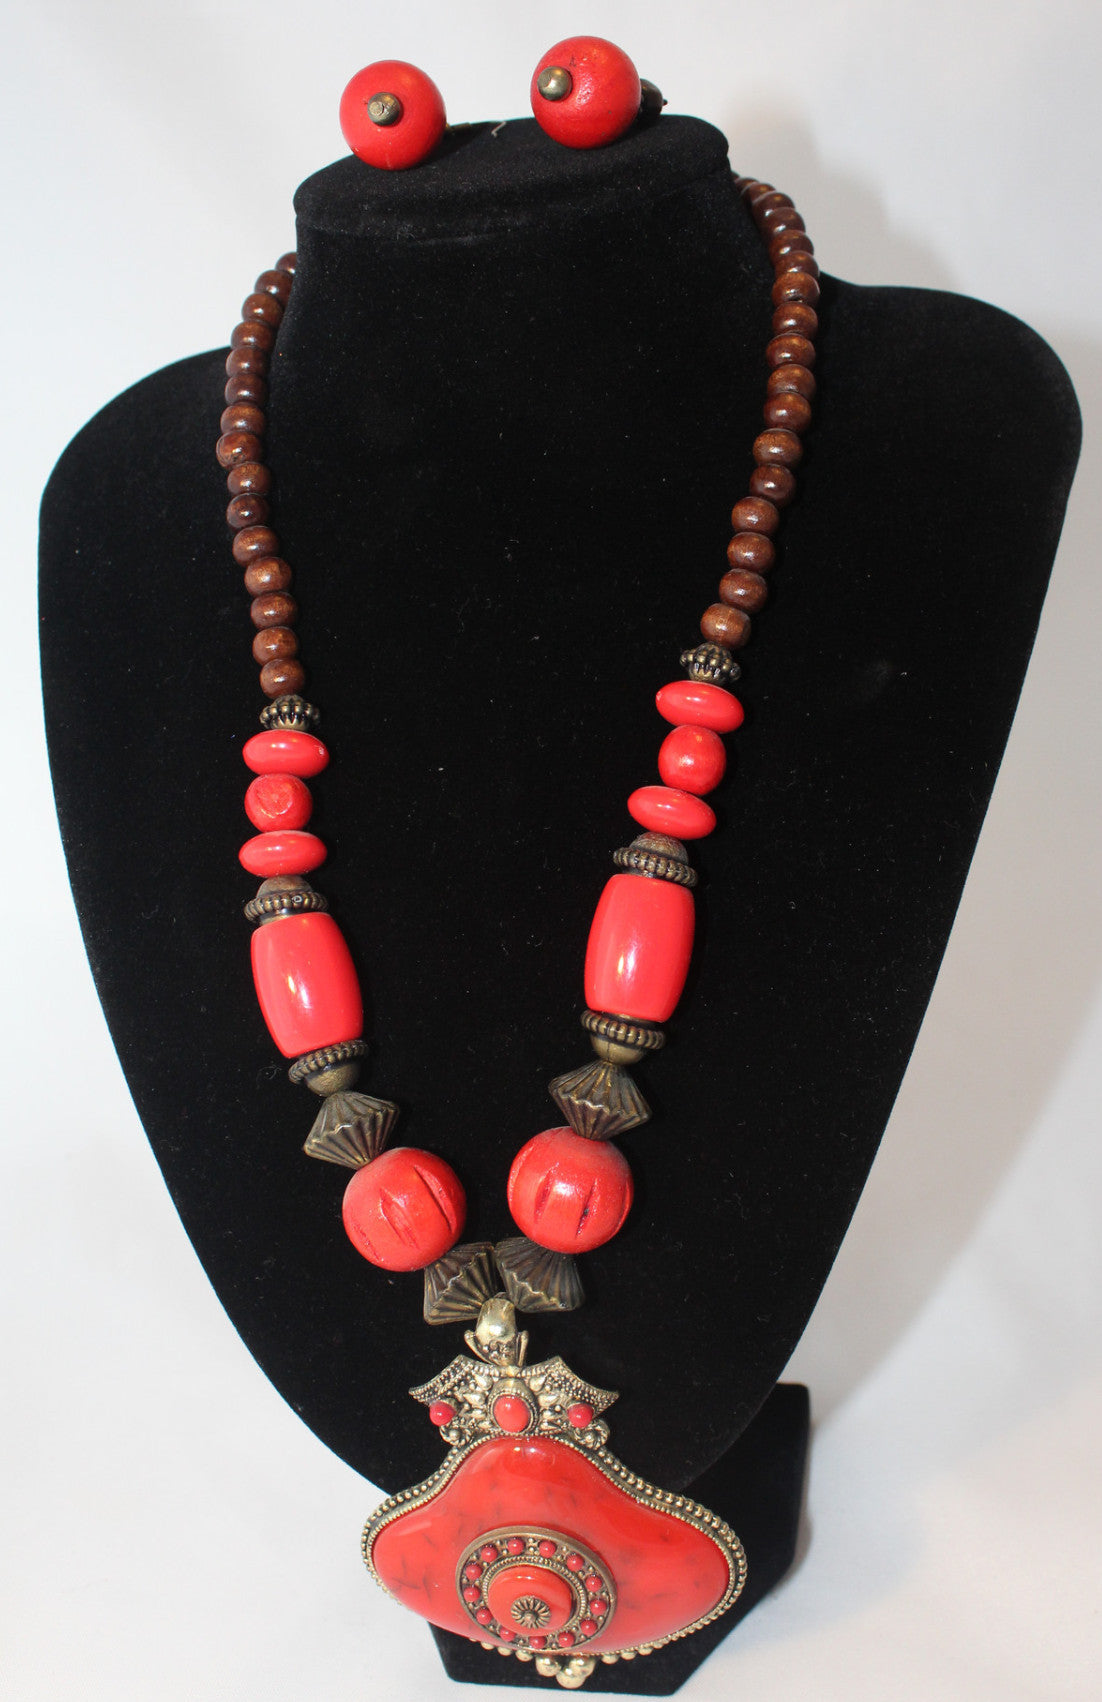 Colorful Tribal Bronze Bead Necklace with Red Pendant and Earrings - Nubian Goods